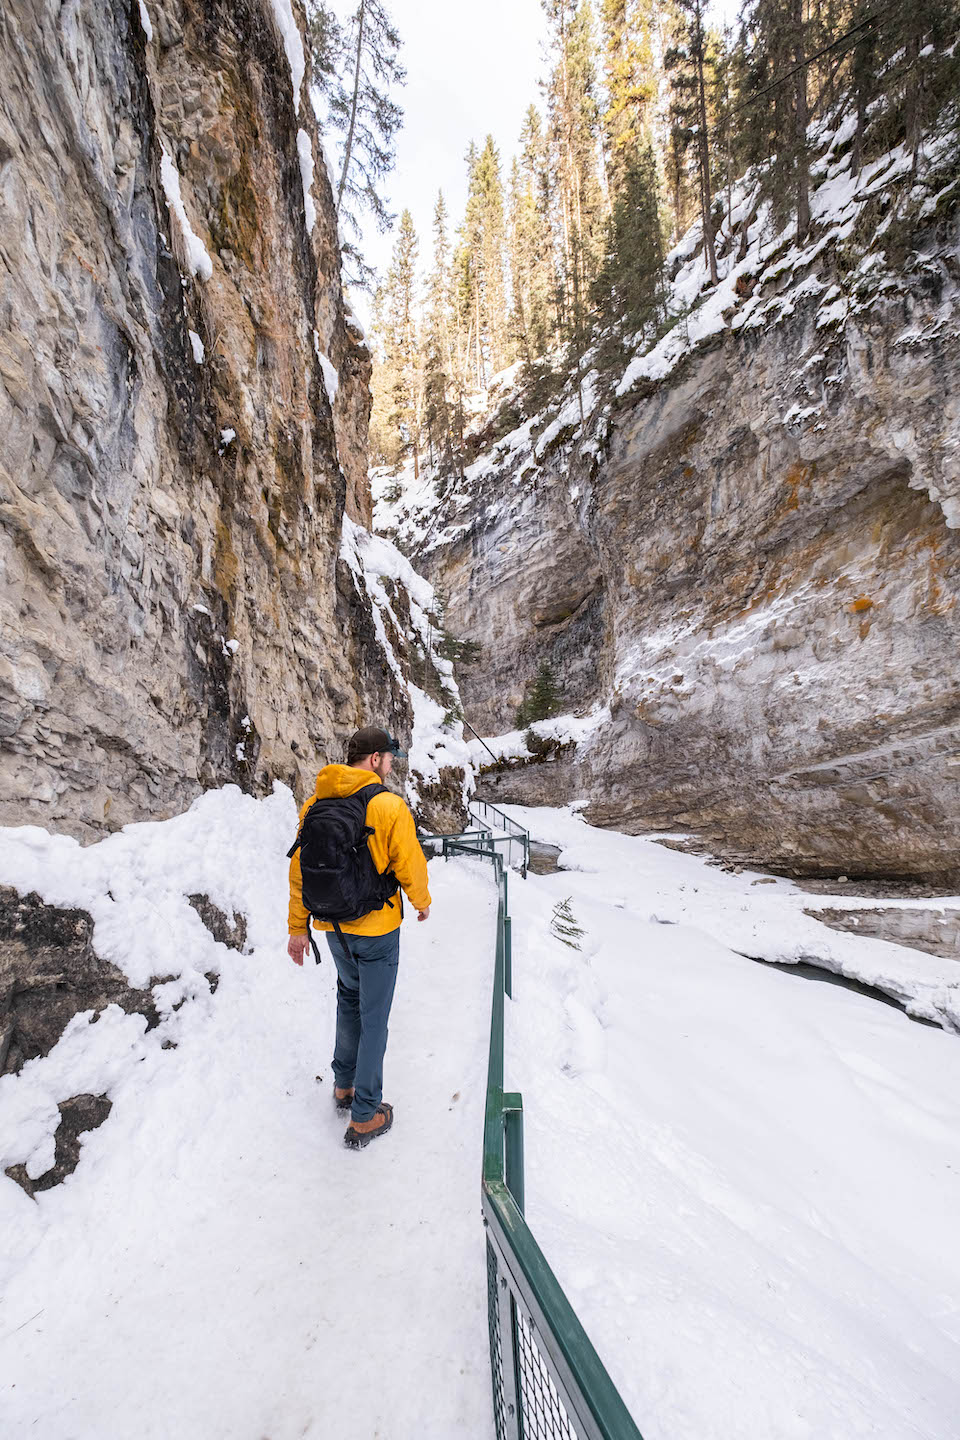 Johnston Canyon Hike in Winter